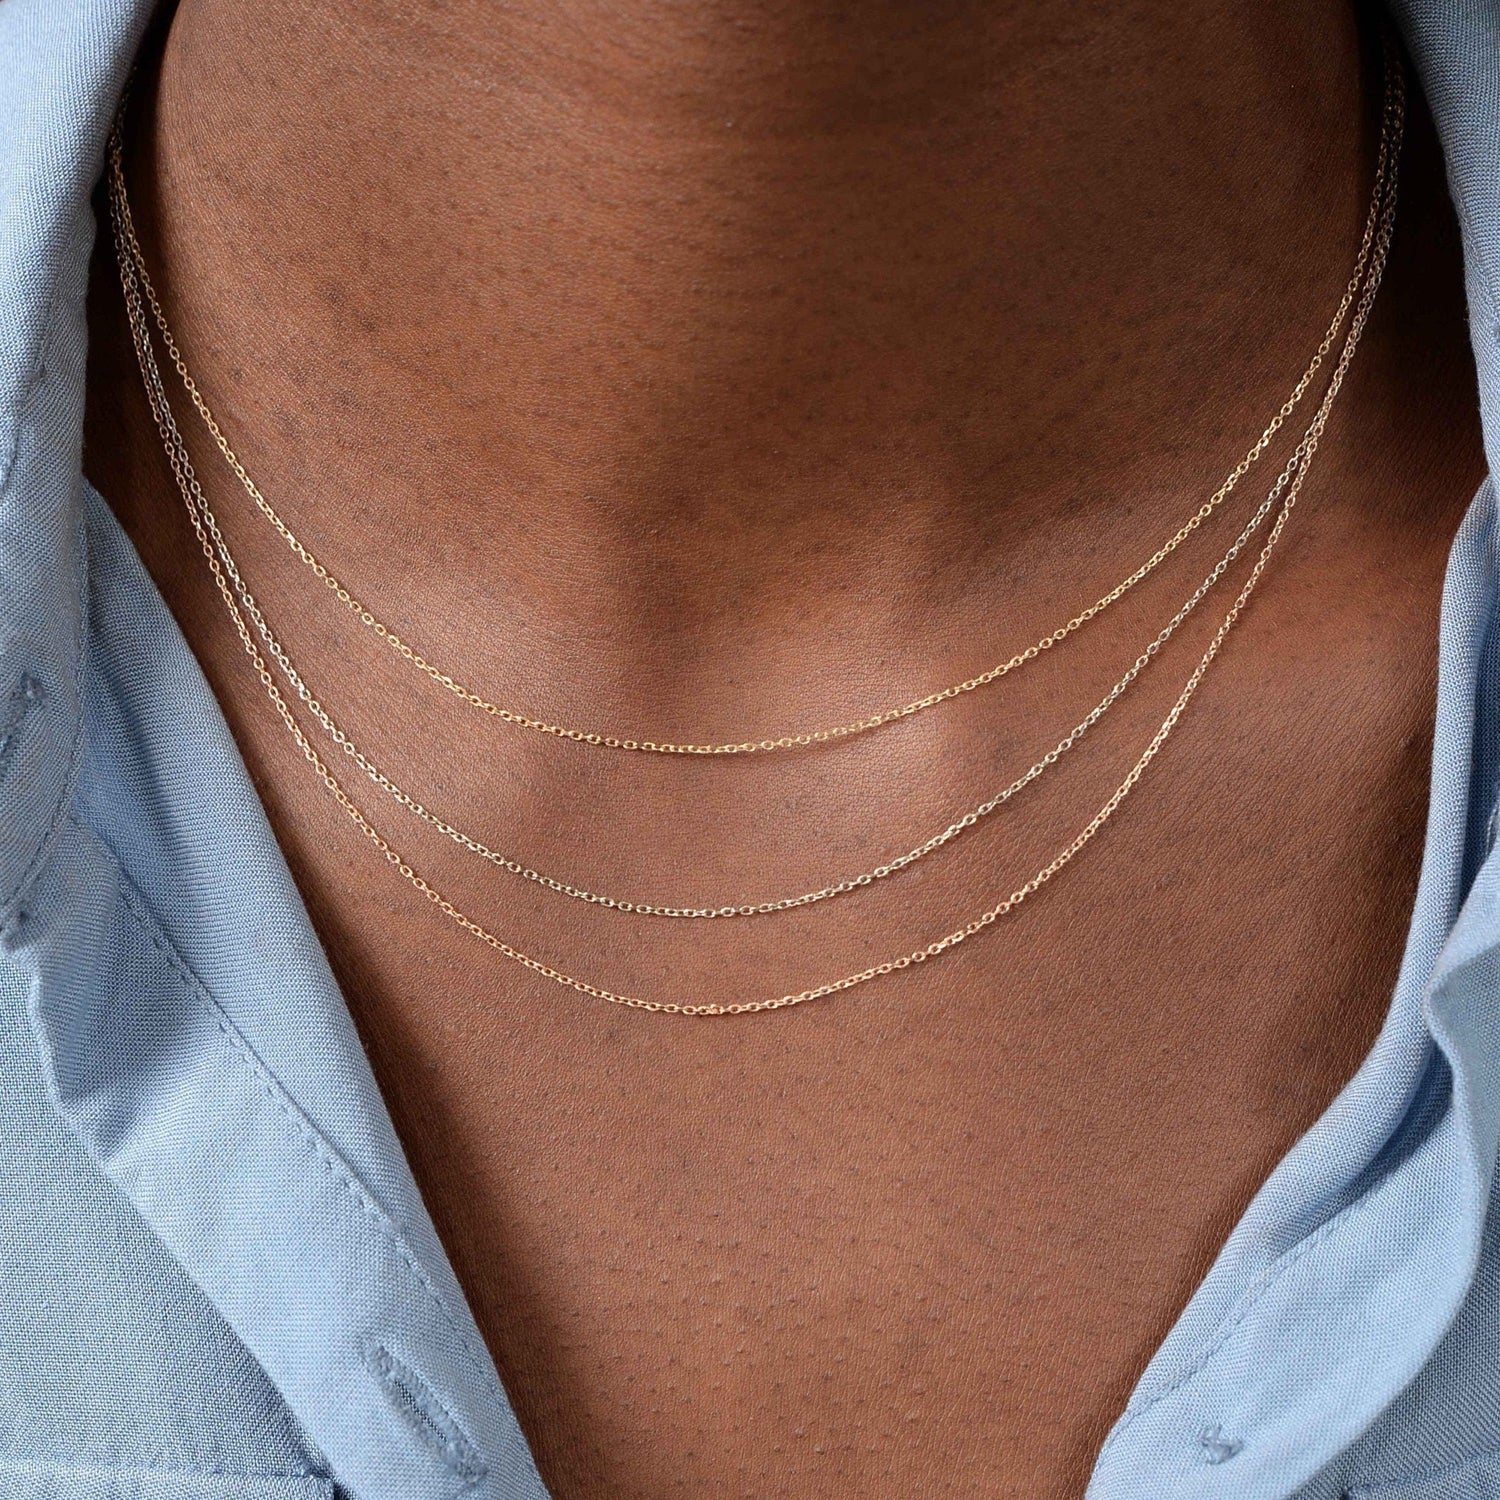 Solid Gold Layered Chain Necklace / 14K Solid Gold Layering Necklace / 3 Layer Chain Necklace / Solid Gold Necklace / Christmas Sale